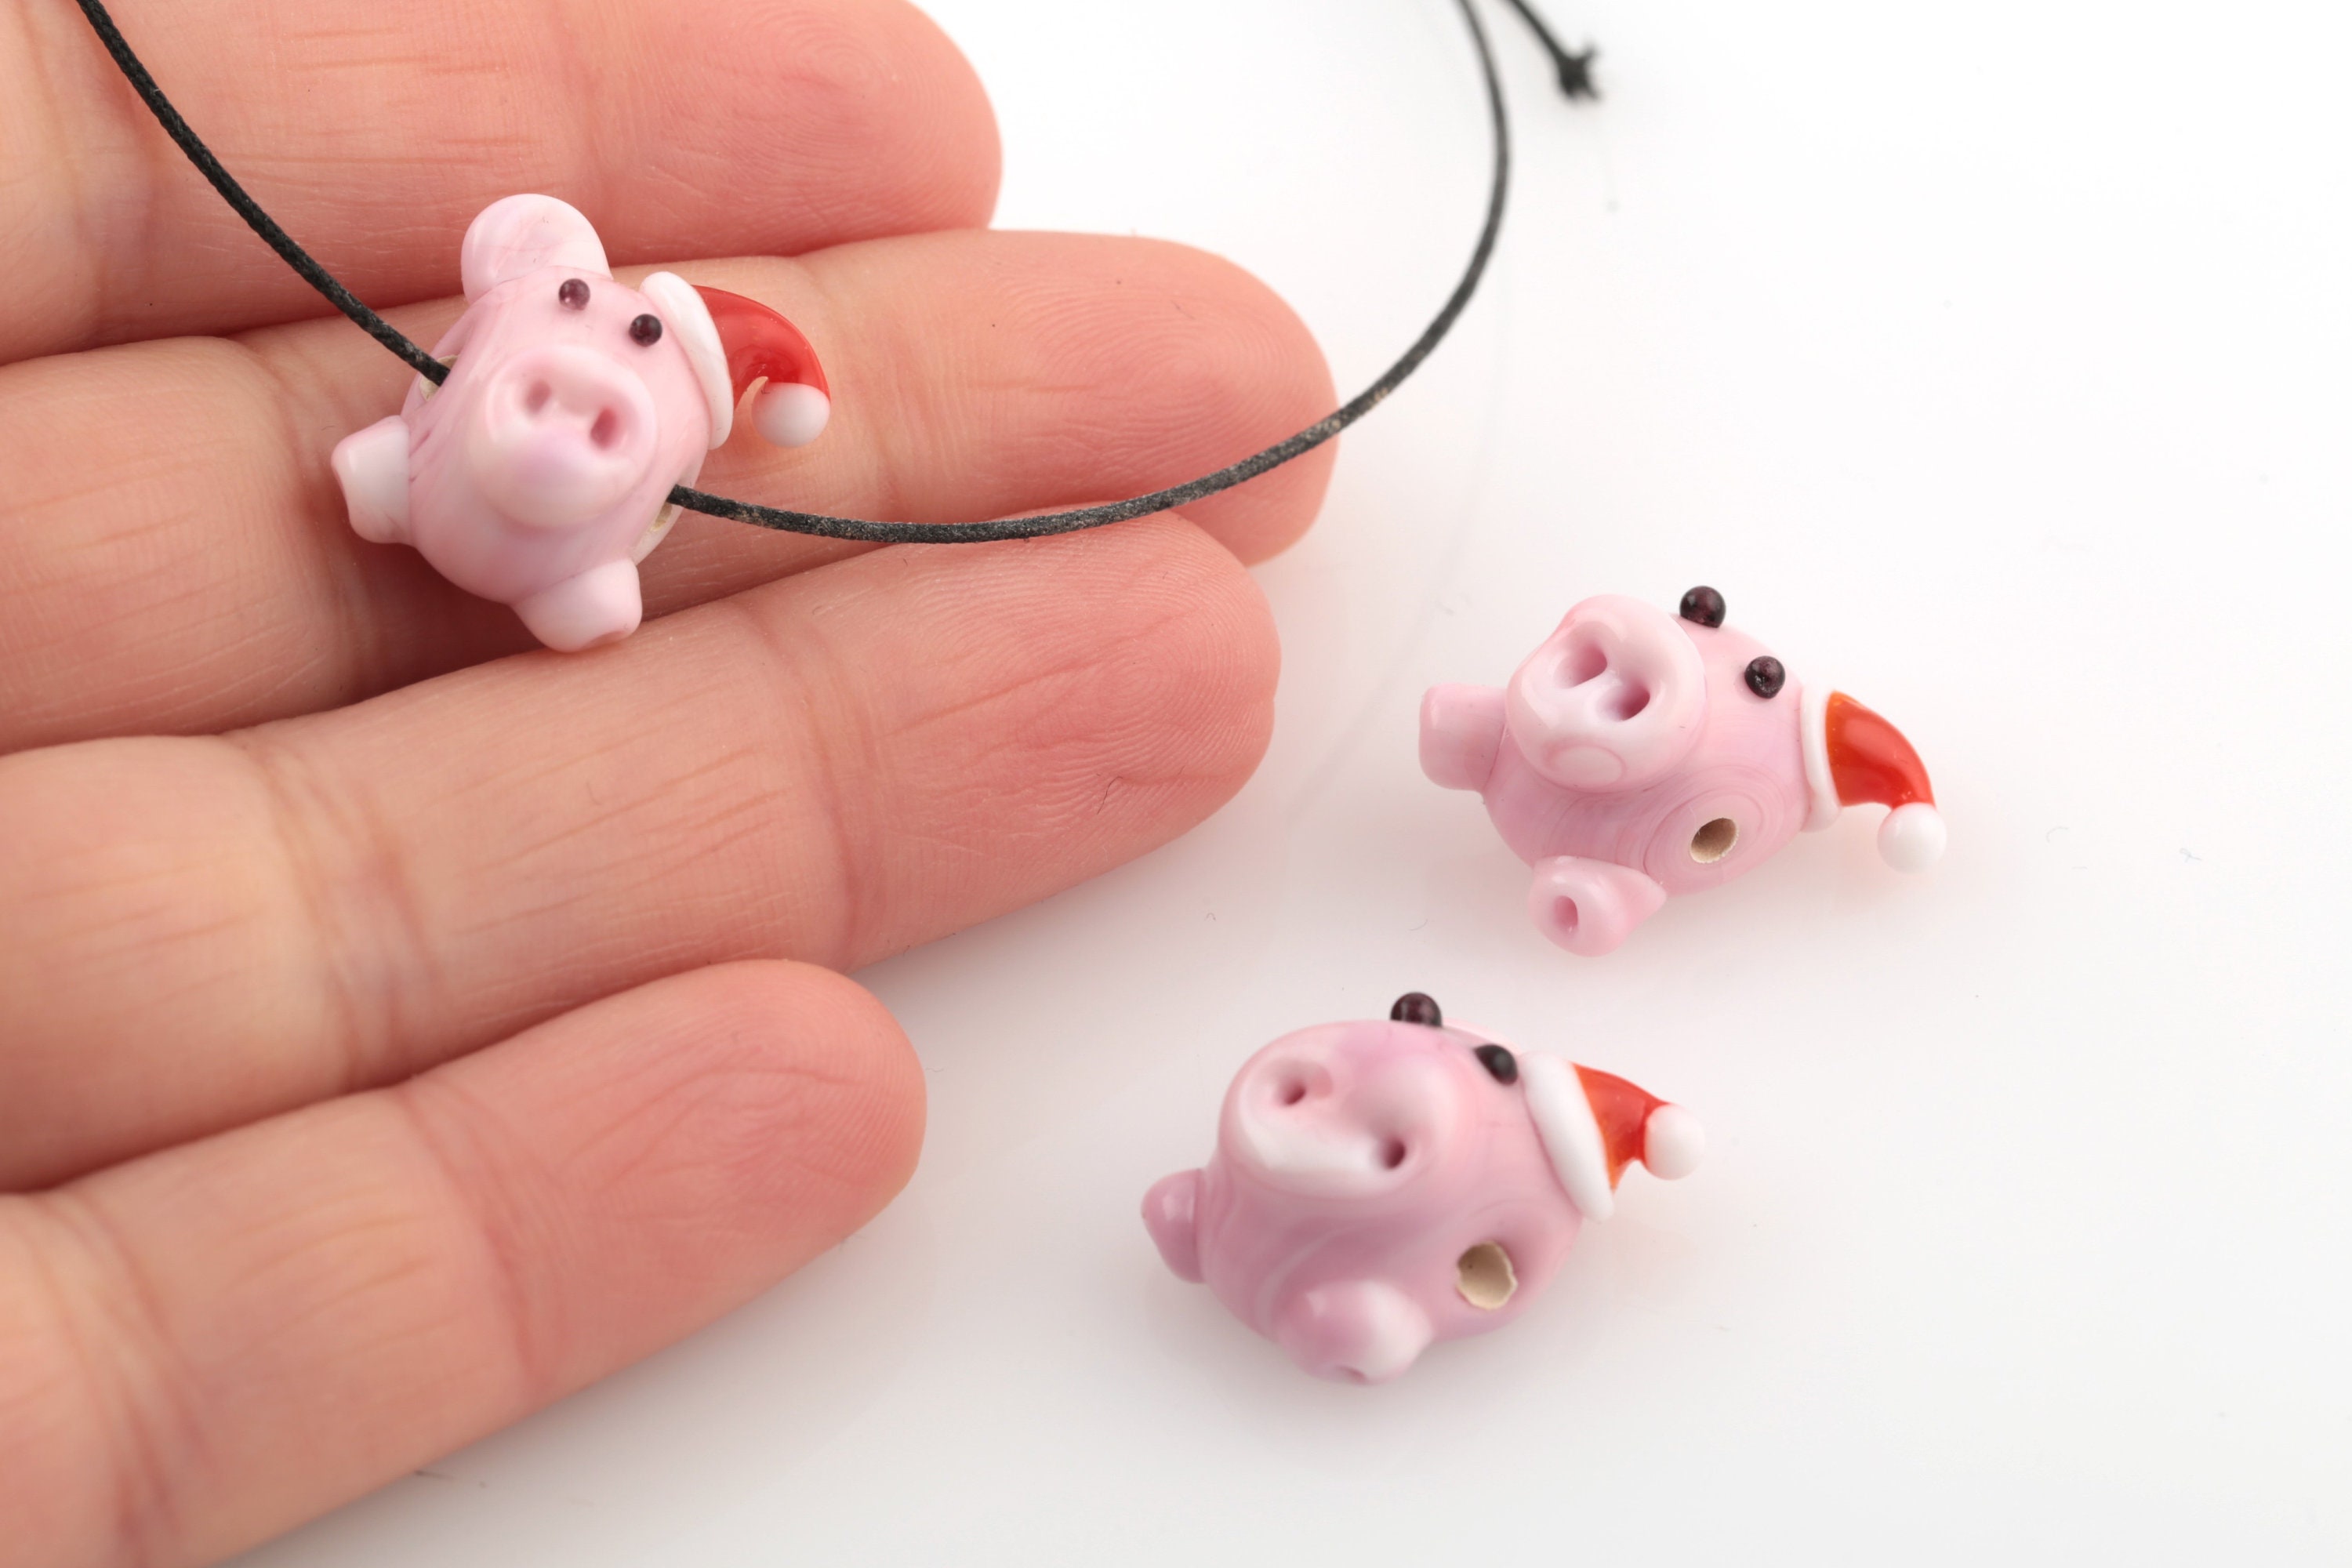 CUTE PIG FOCAL Bead , Focal Beads, Pig Silicone Beads, Silicone Beads, Pen  Beads, Scribe Bead 